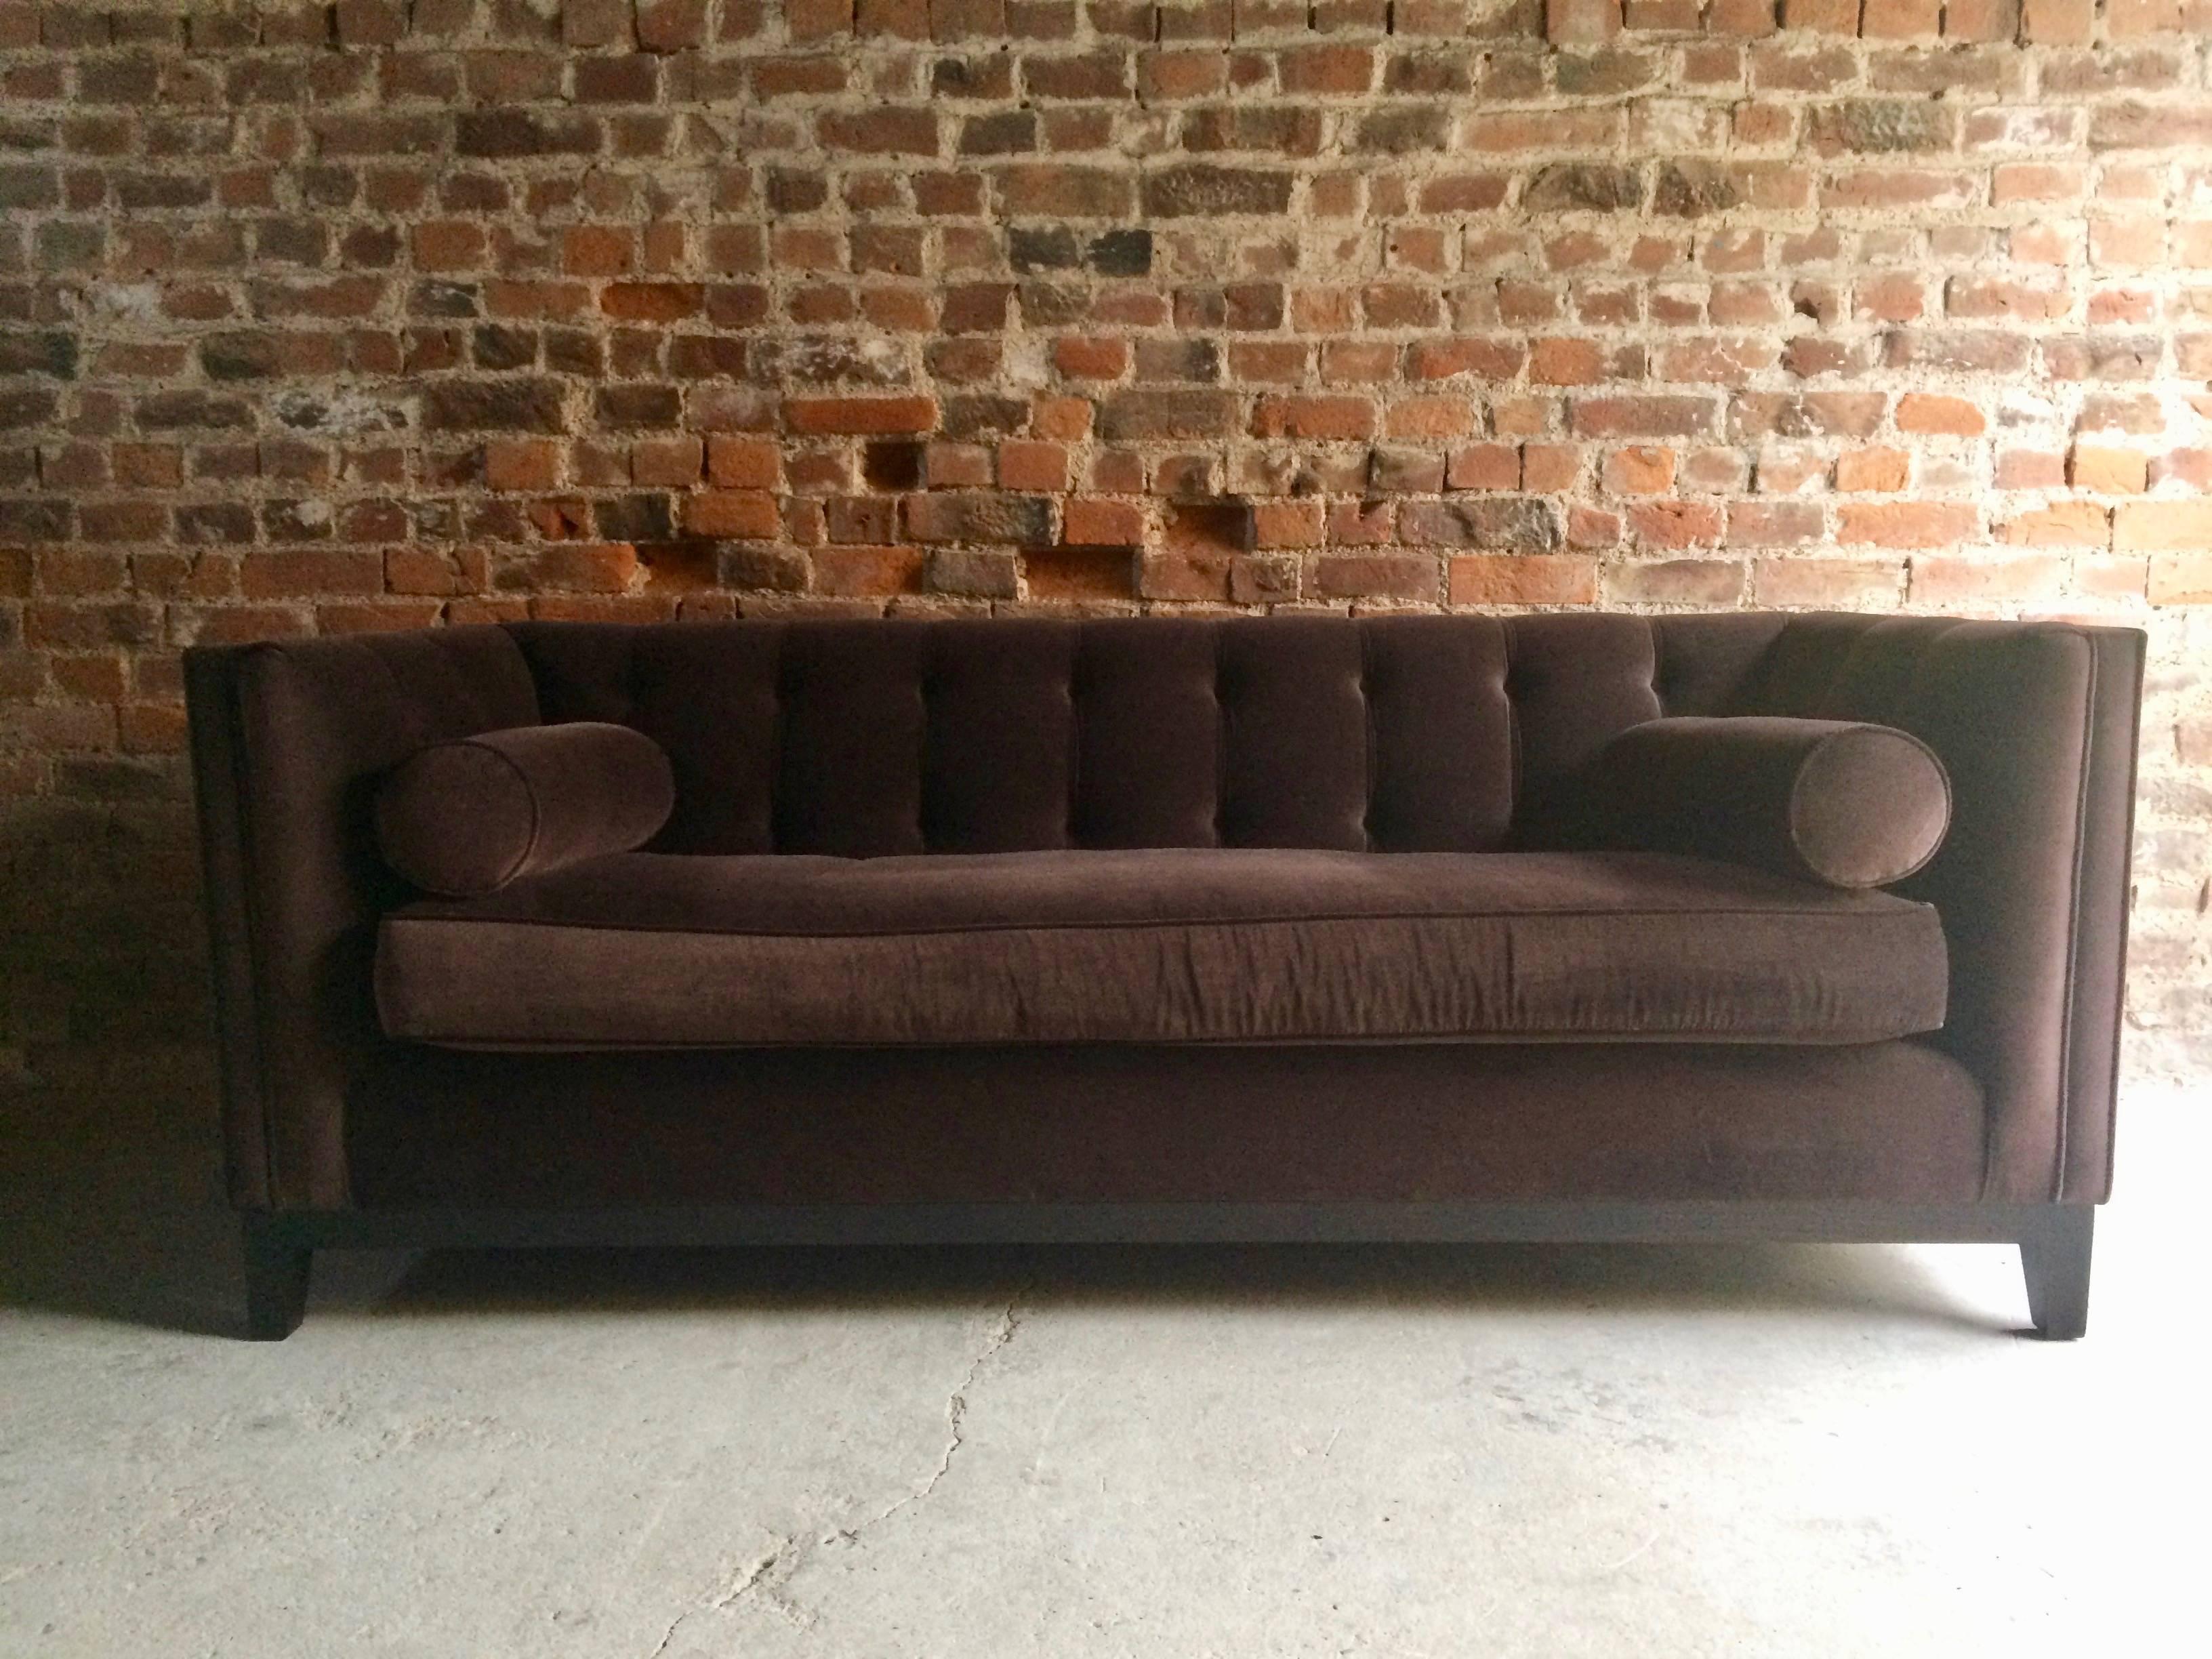 Contemporary Bespoke Chesterfield Sofa with Matching Foot Stool Brown Velvet Sublime